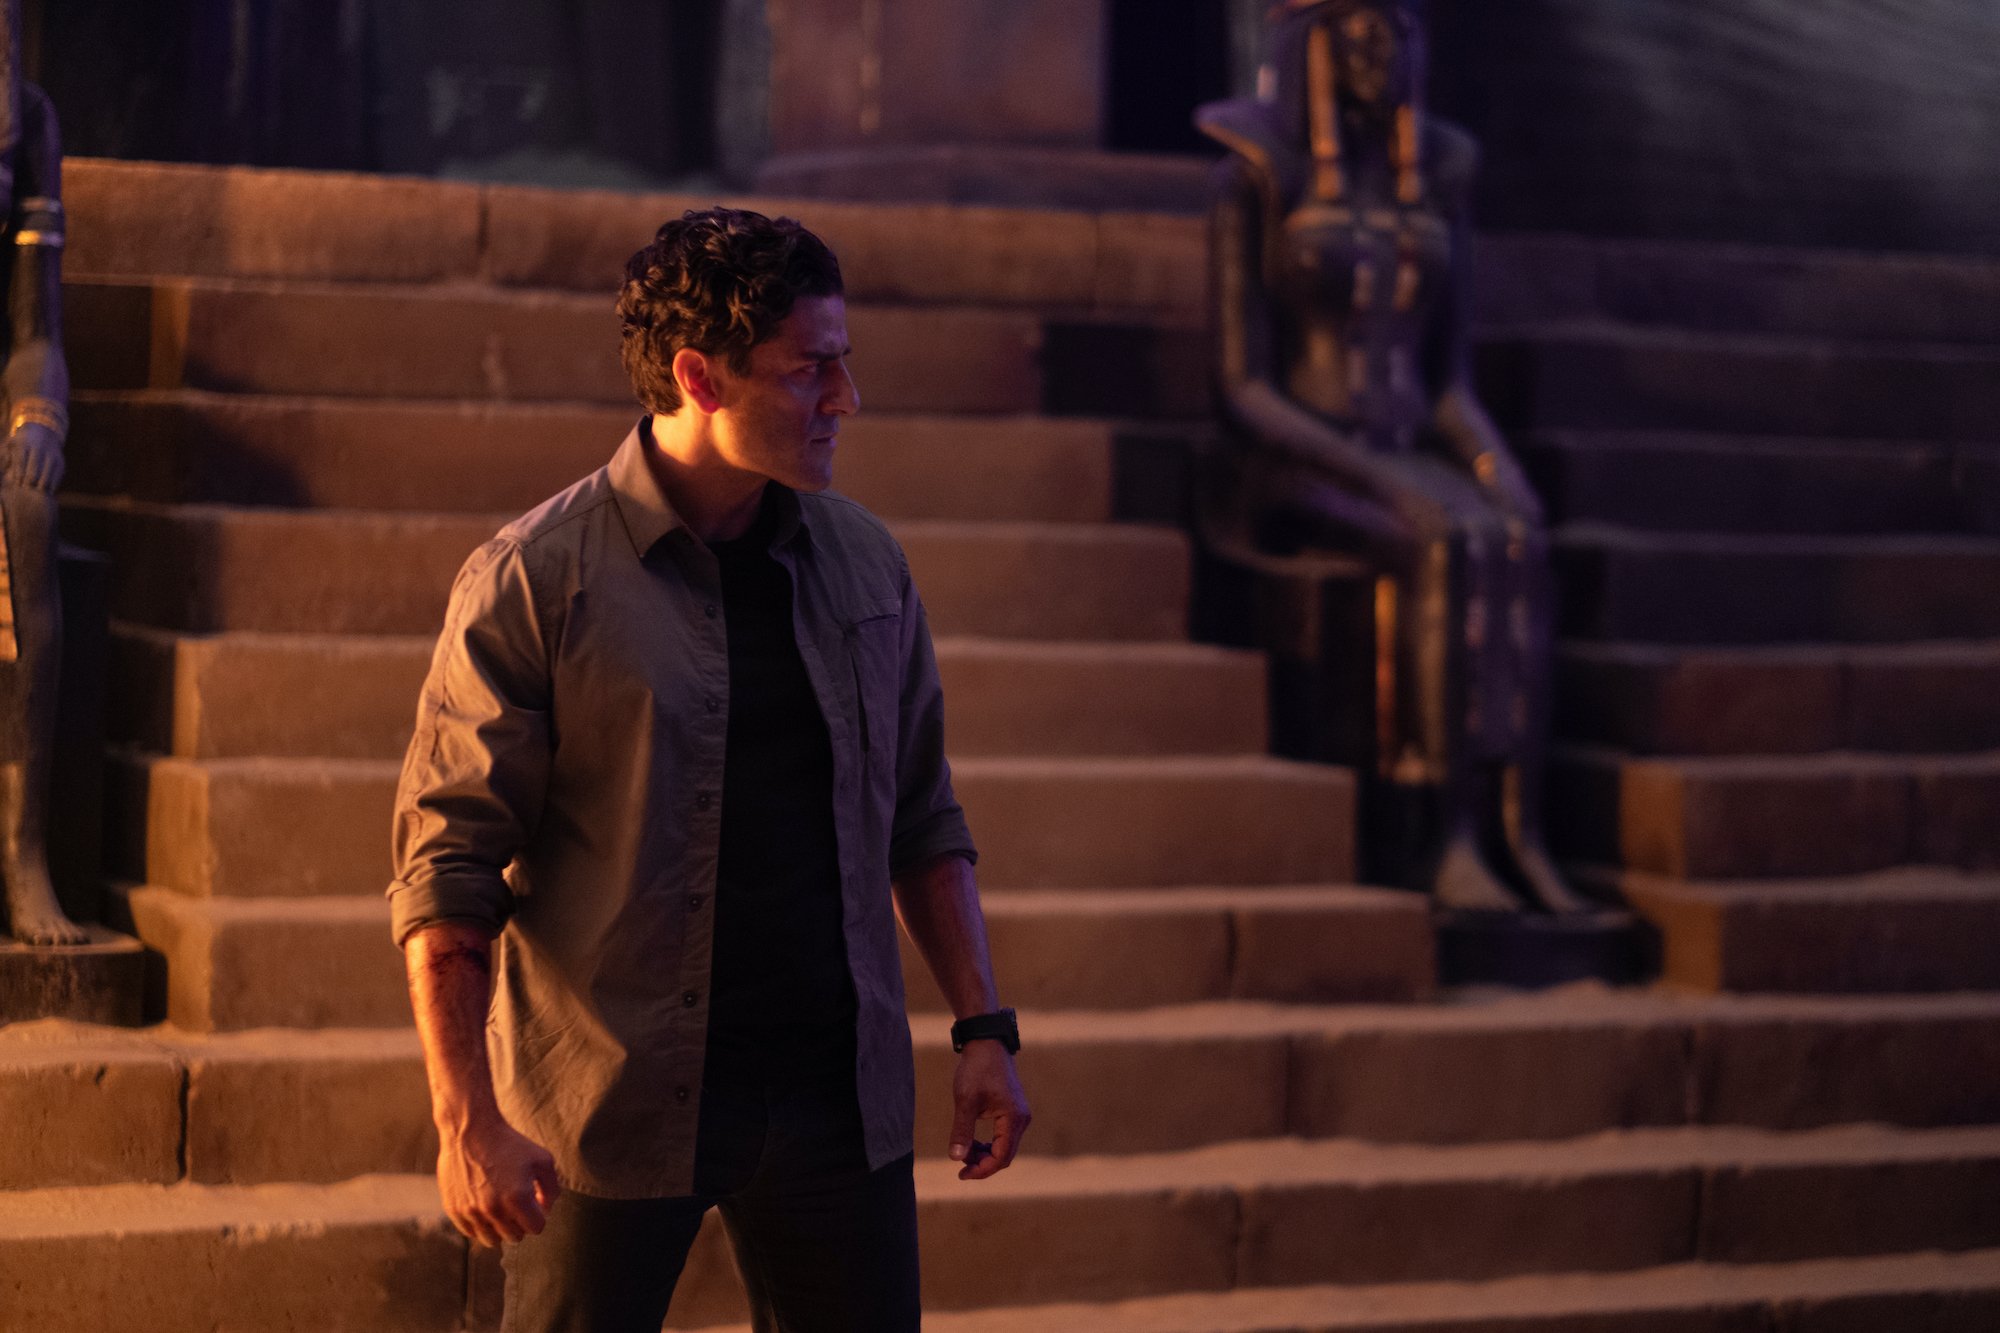 'Moon Knight' Episode 4 star Oscar Isaac, in character as Marc Spector, wears a light gray unbuttoned long sleeve shirt over a black shirt and black pants.